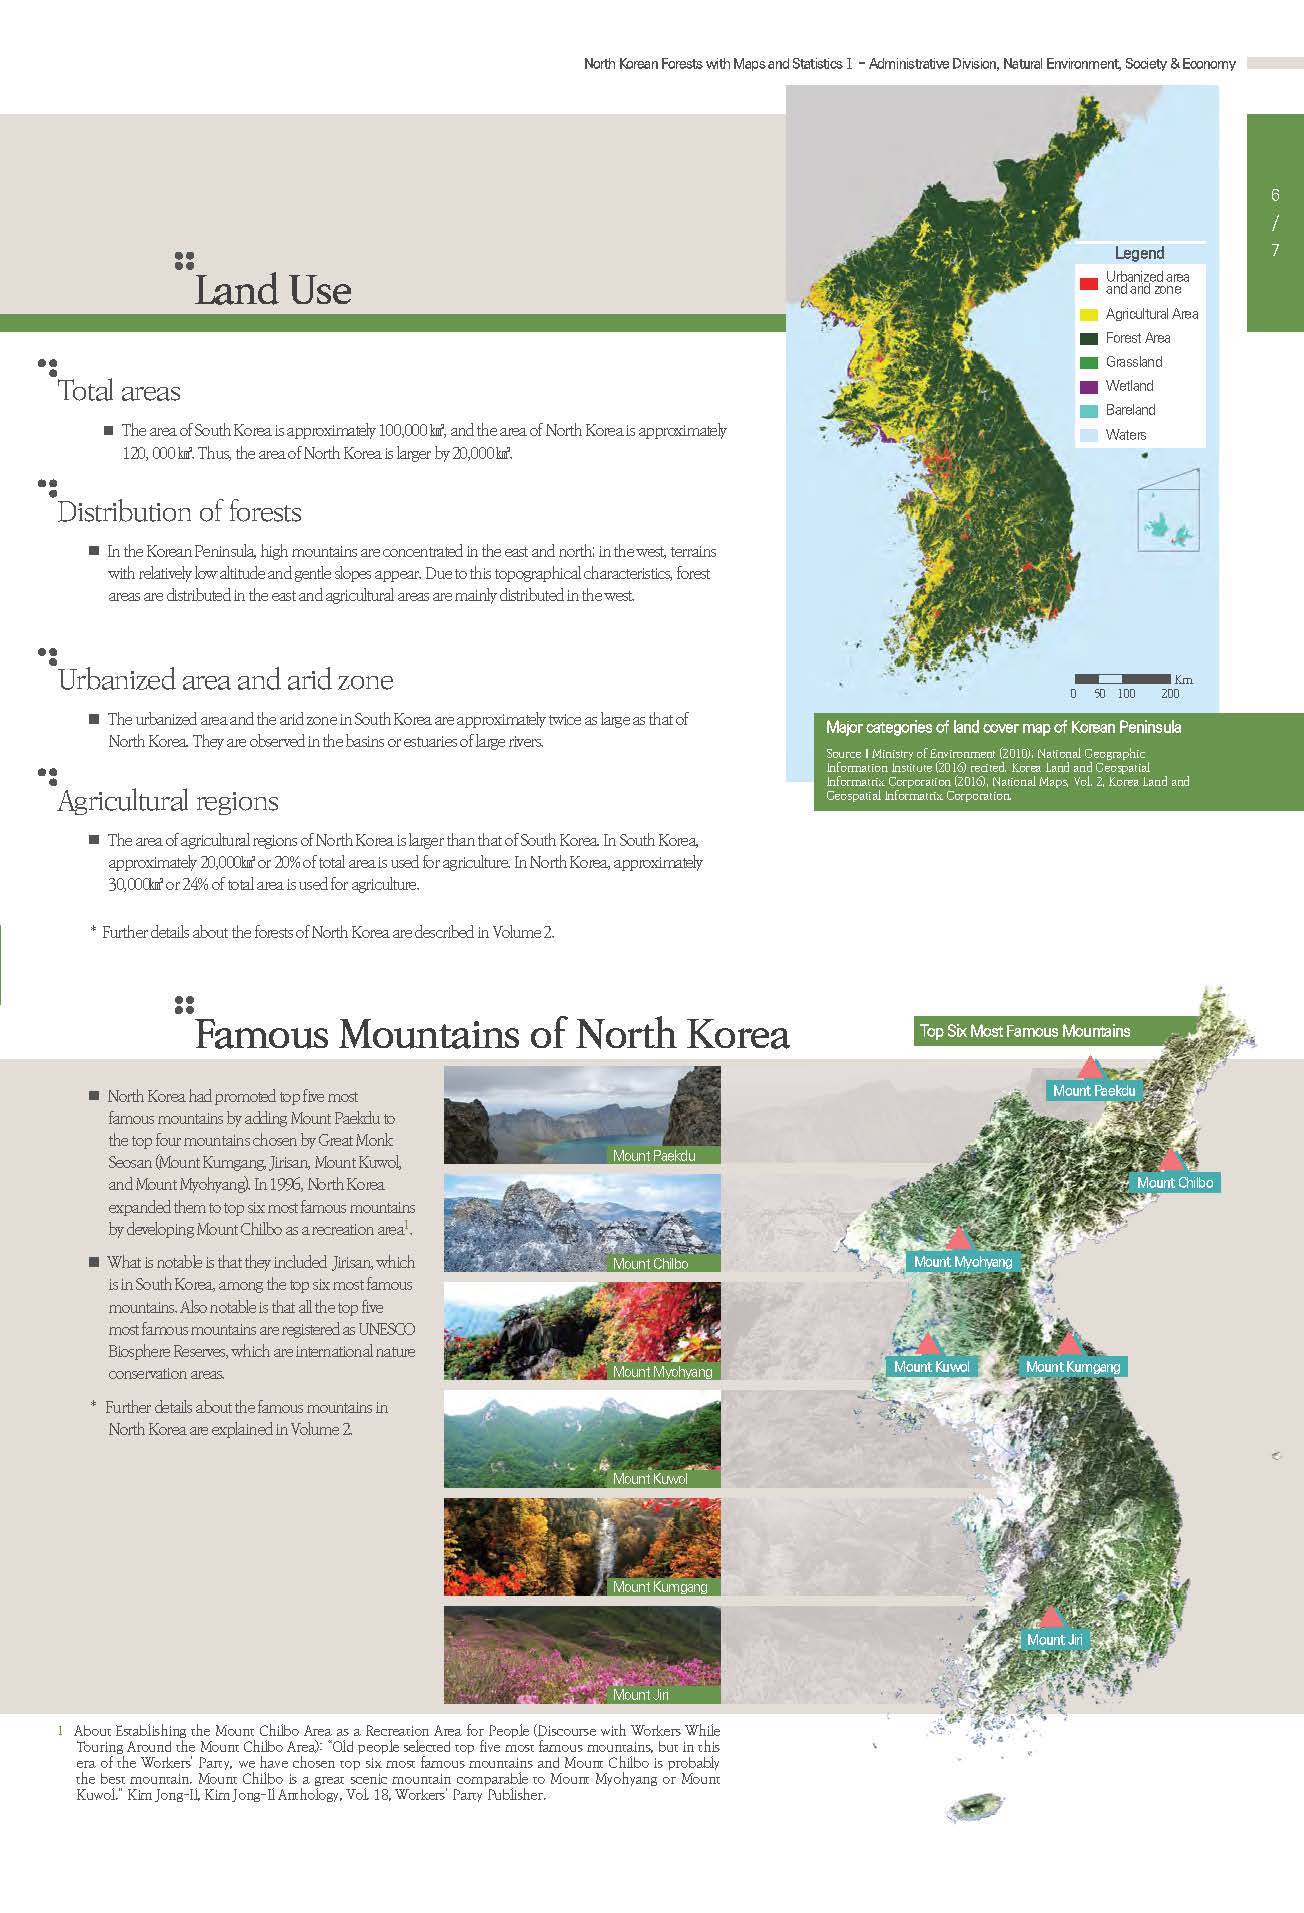 Current status of forest utilization and major iconic mountains in North Korea